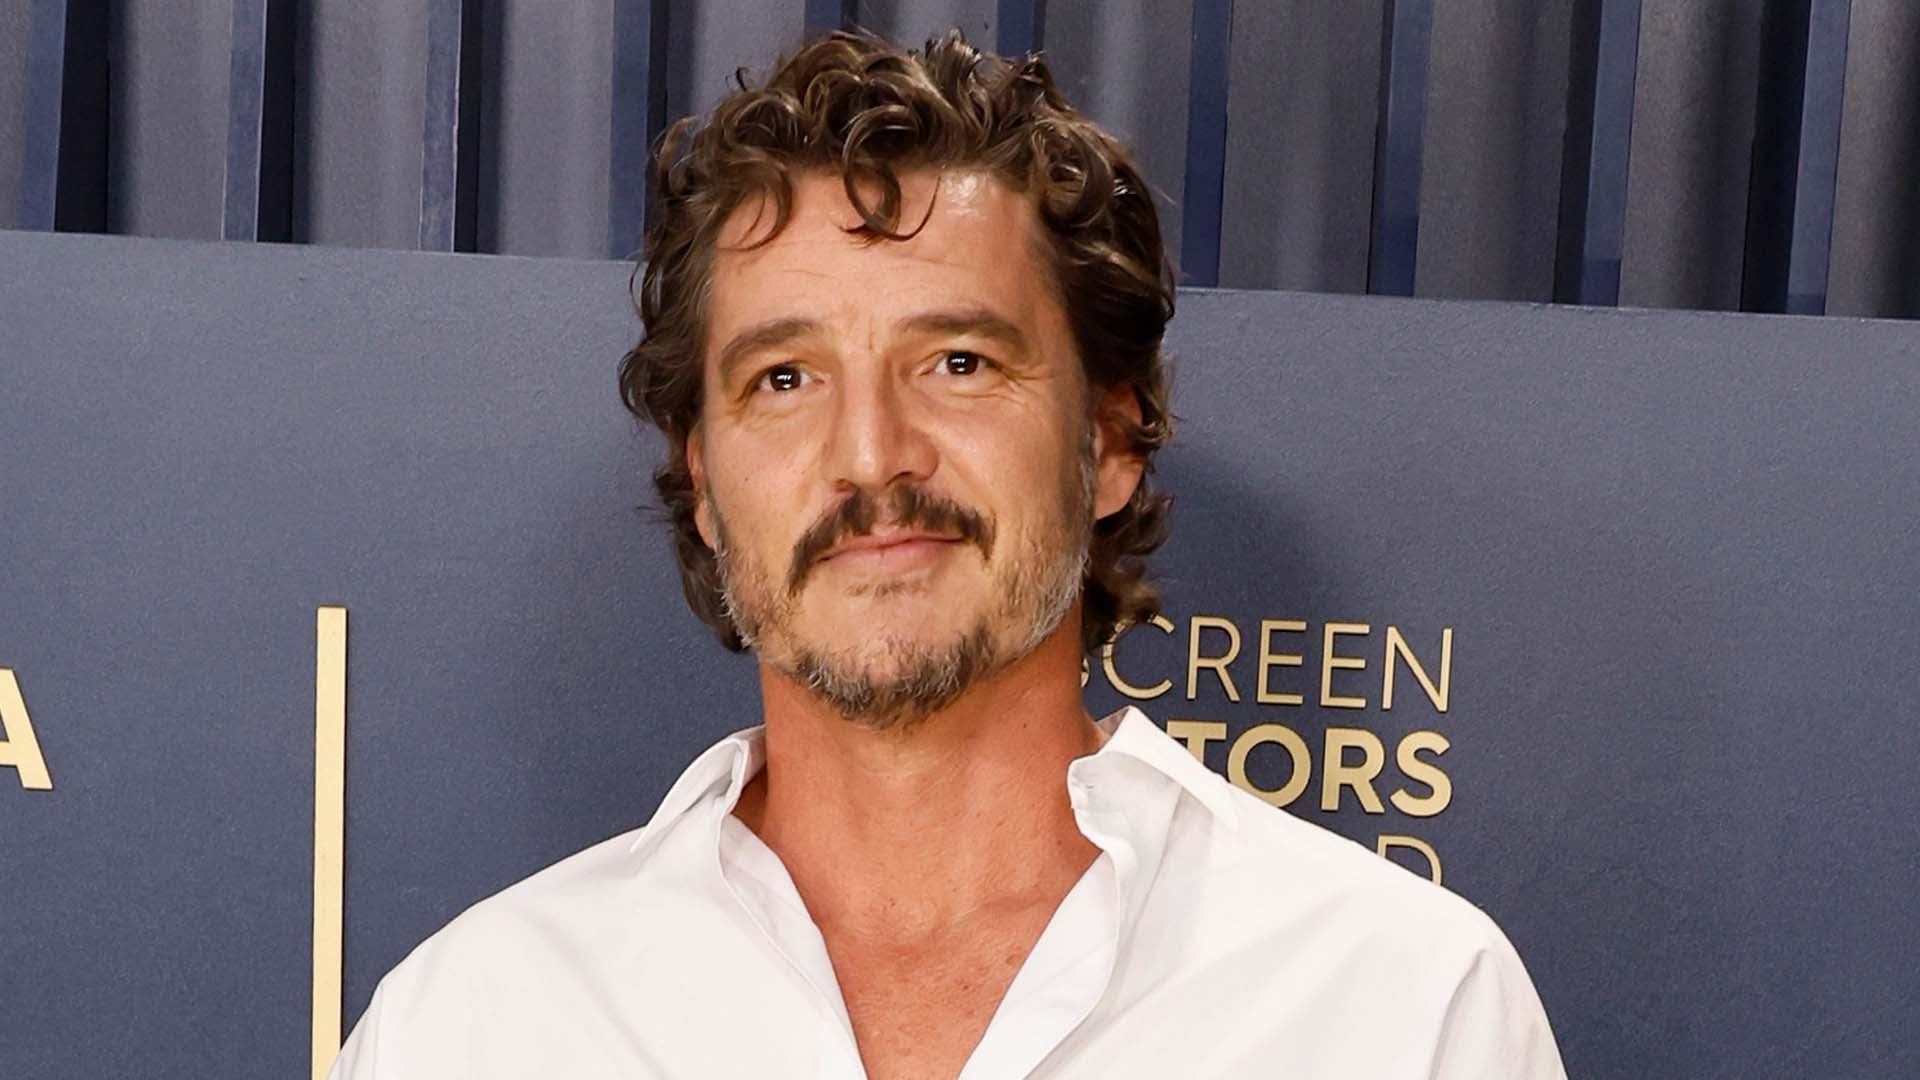 SAG Awards: Watch Pedro Pascal Wear Open Shirt for Black-and-White Look on Red Carpet